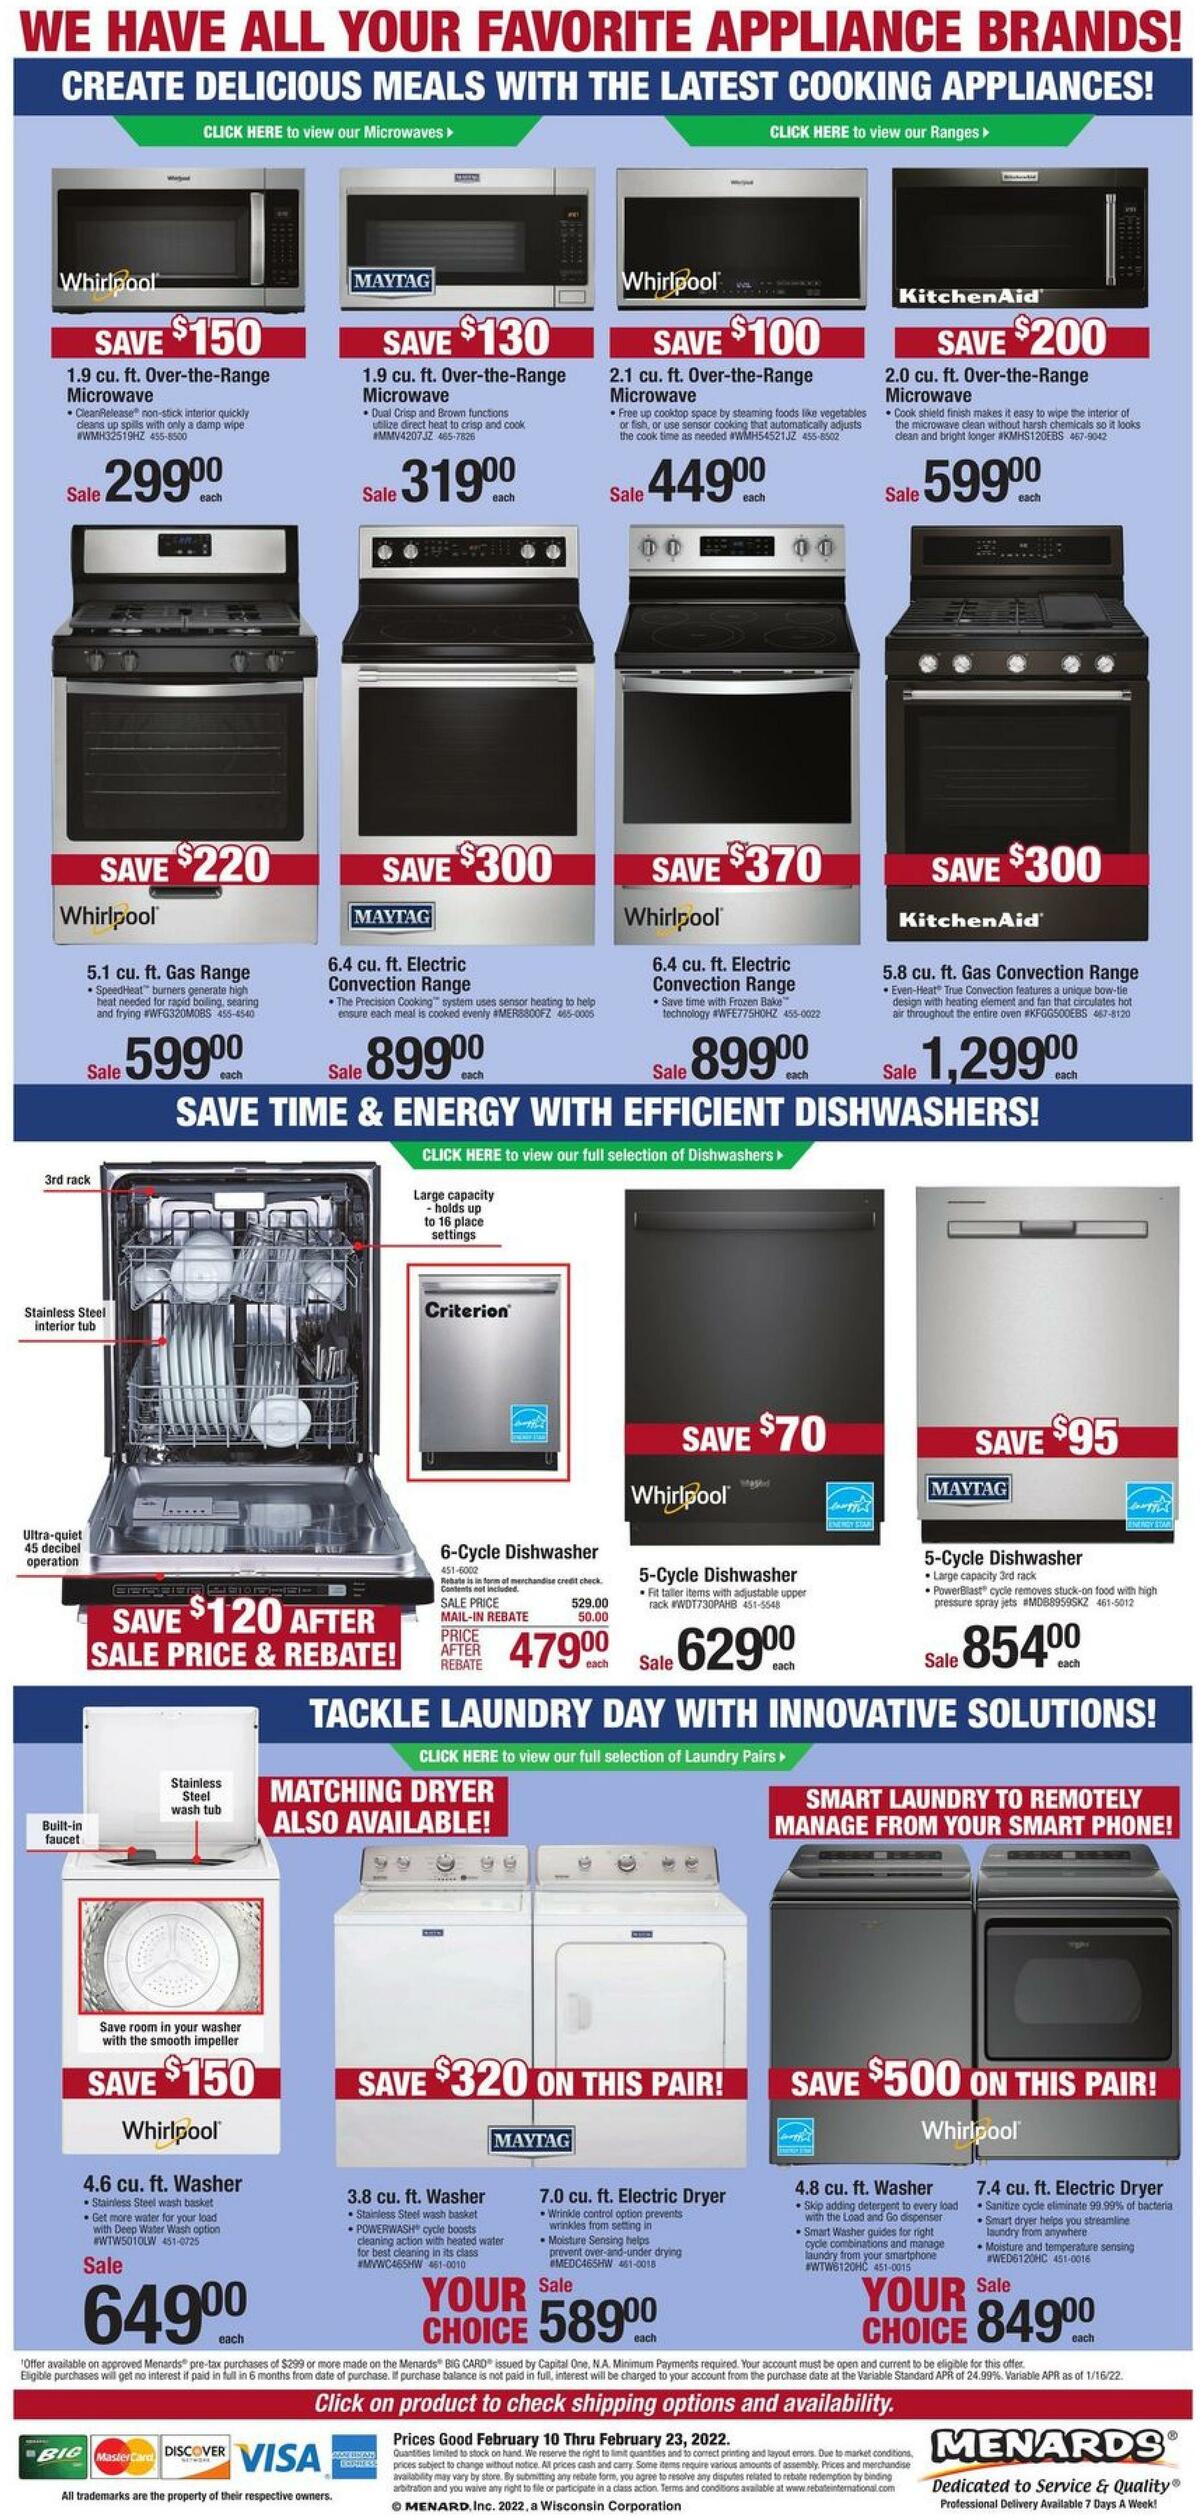 Menards Race to Savings Sale Weekly Ad from February 9